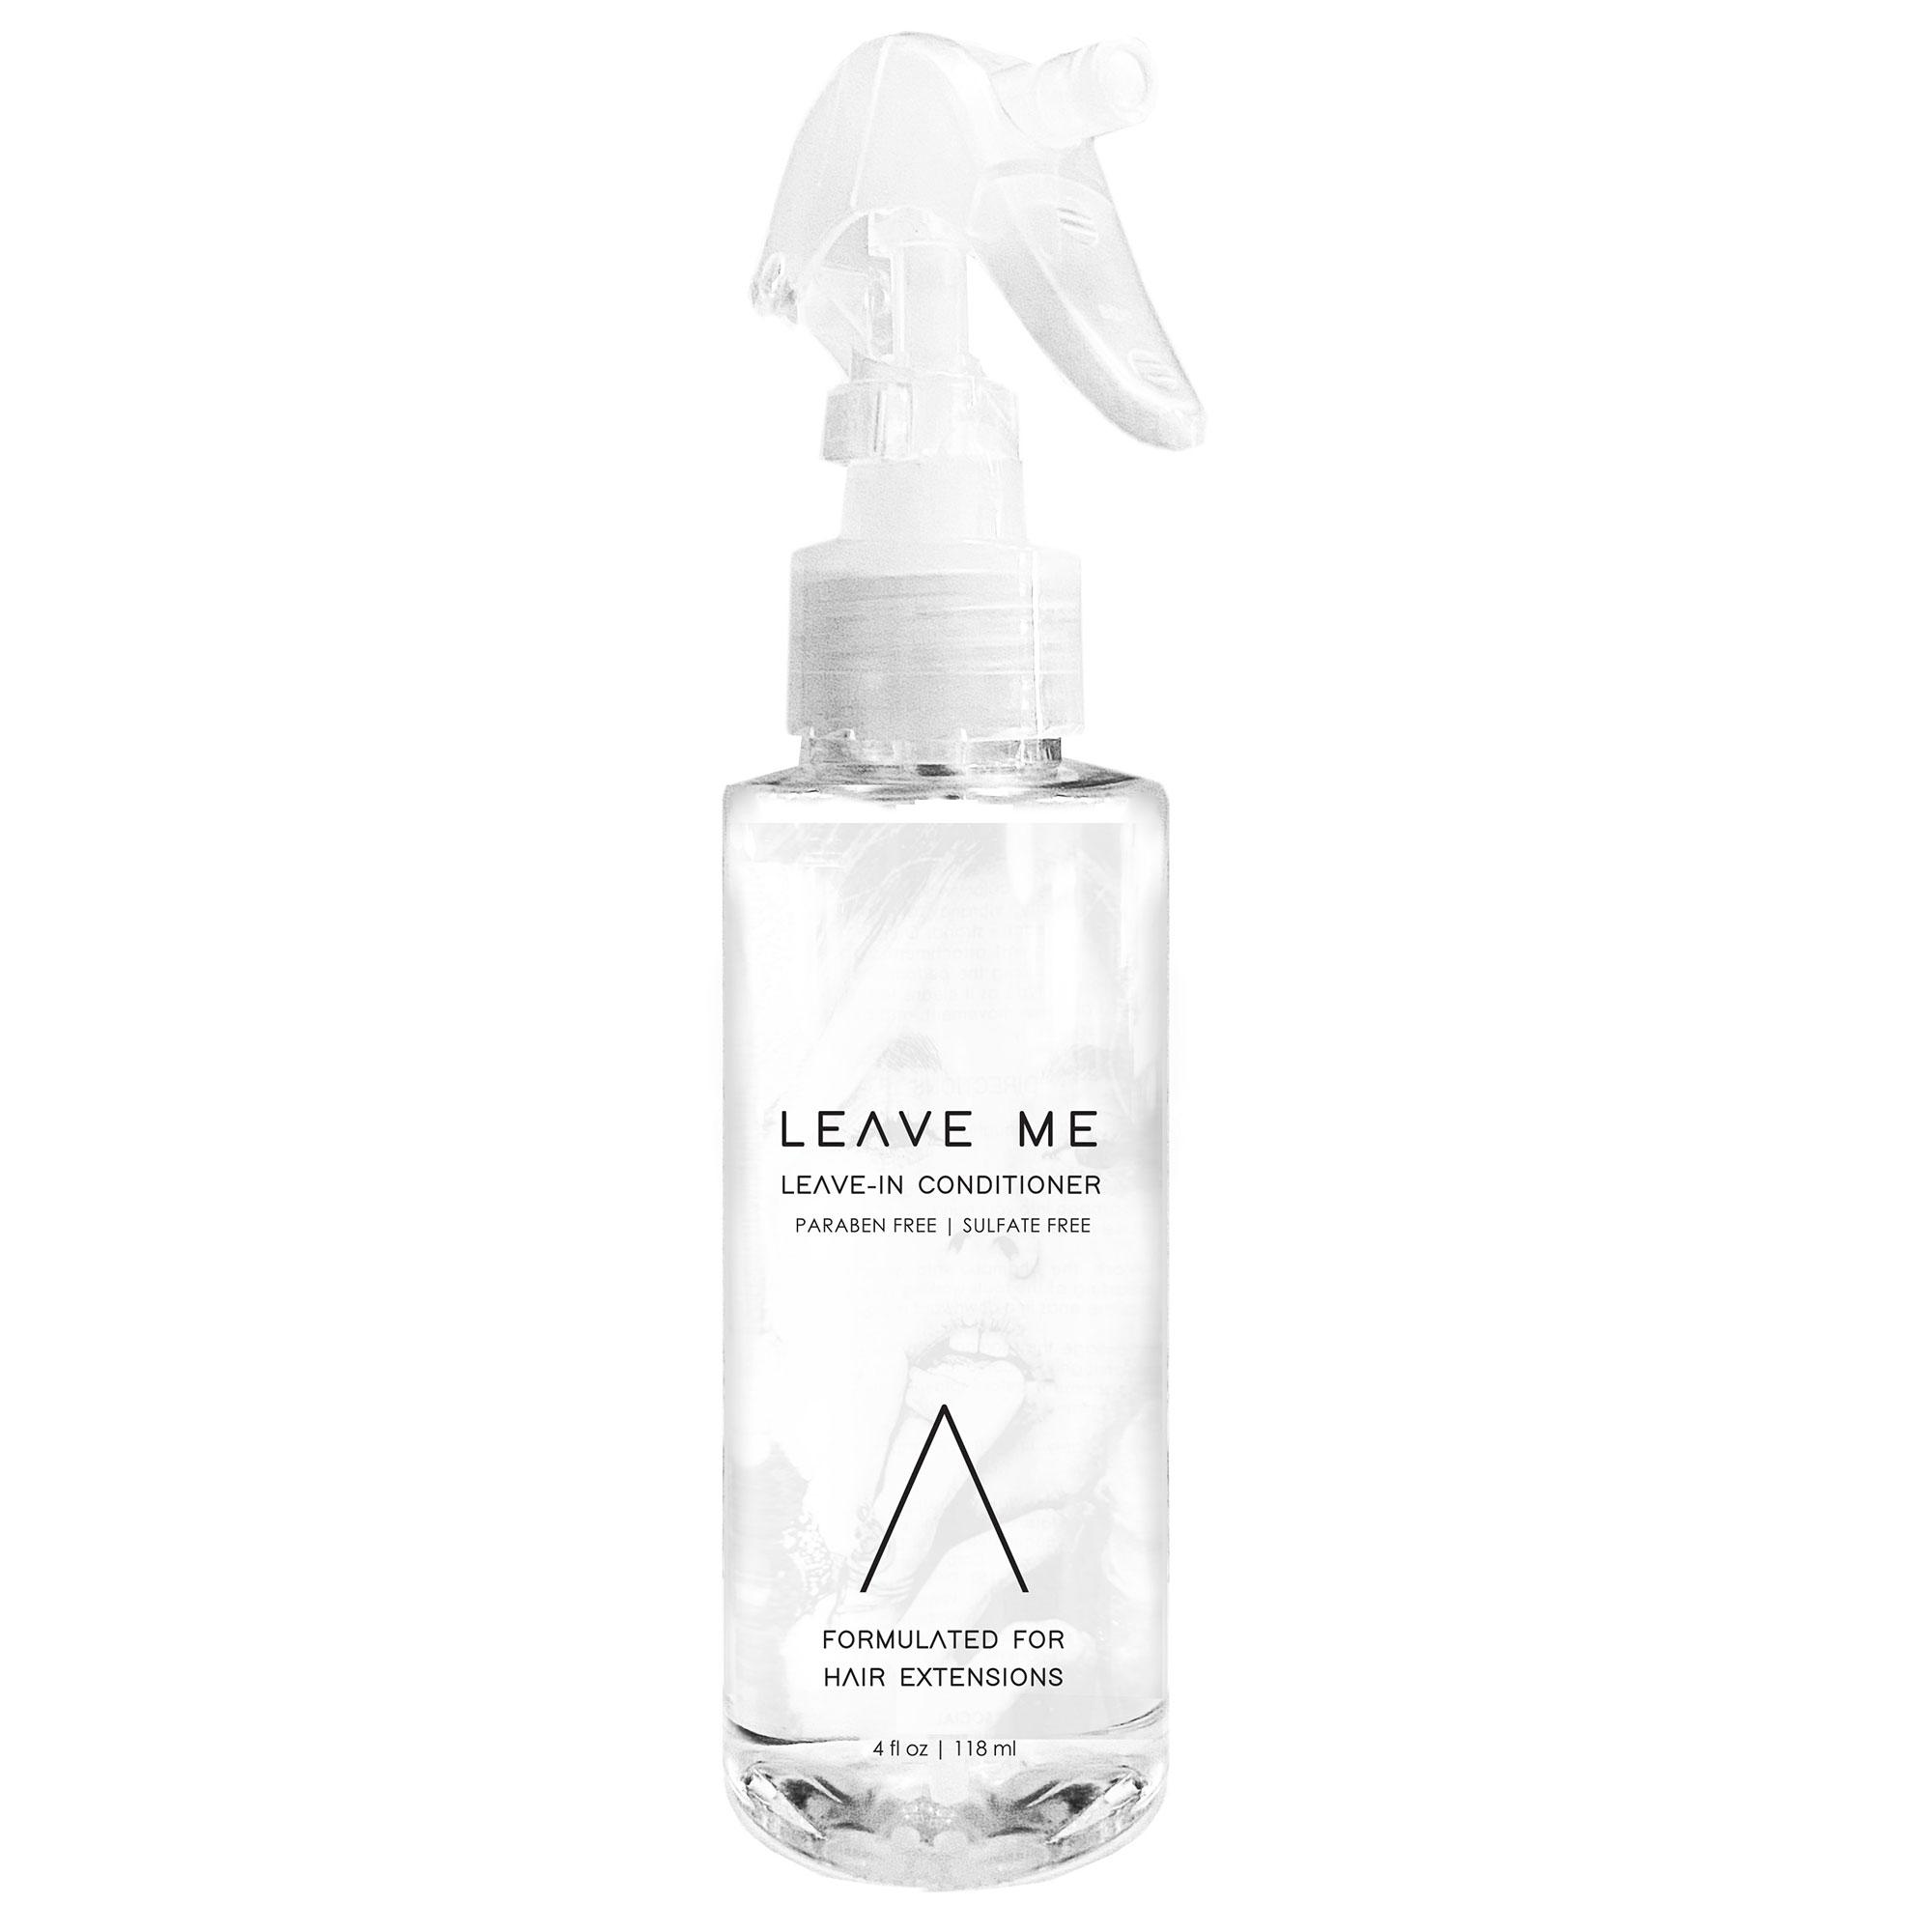 AMPLIFY CARE & STYLE: Leave Me Leave-in Conditioner